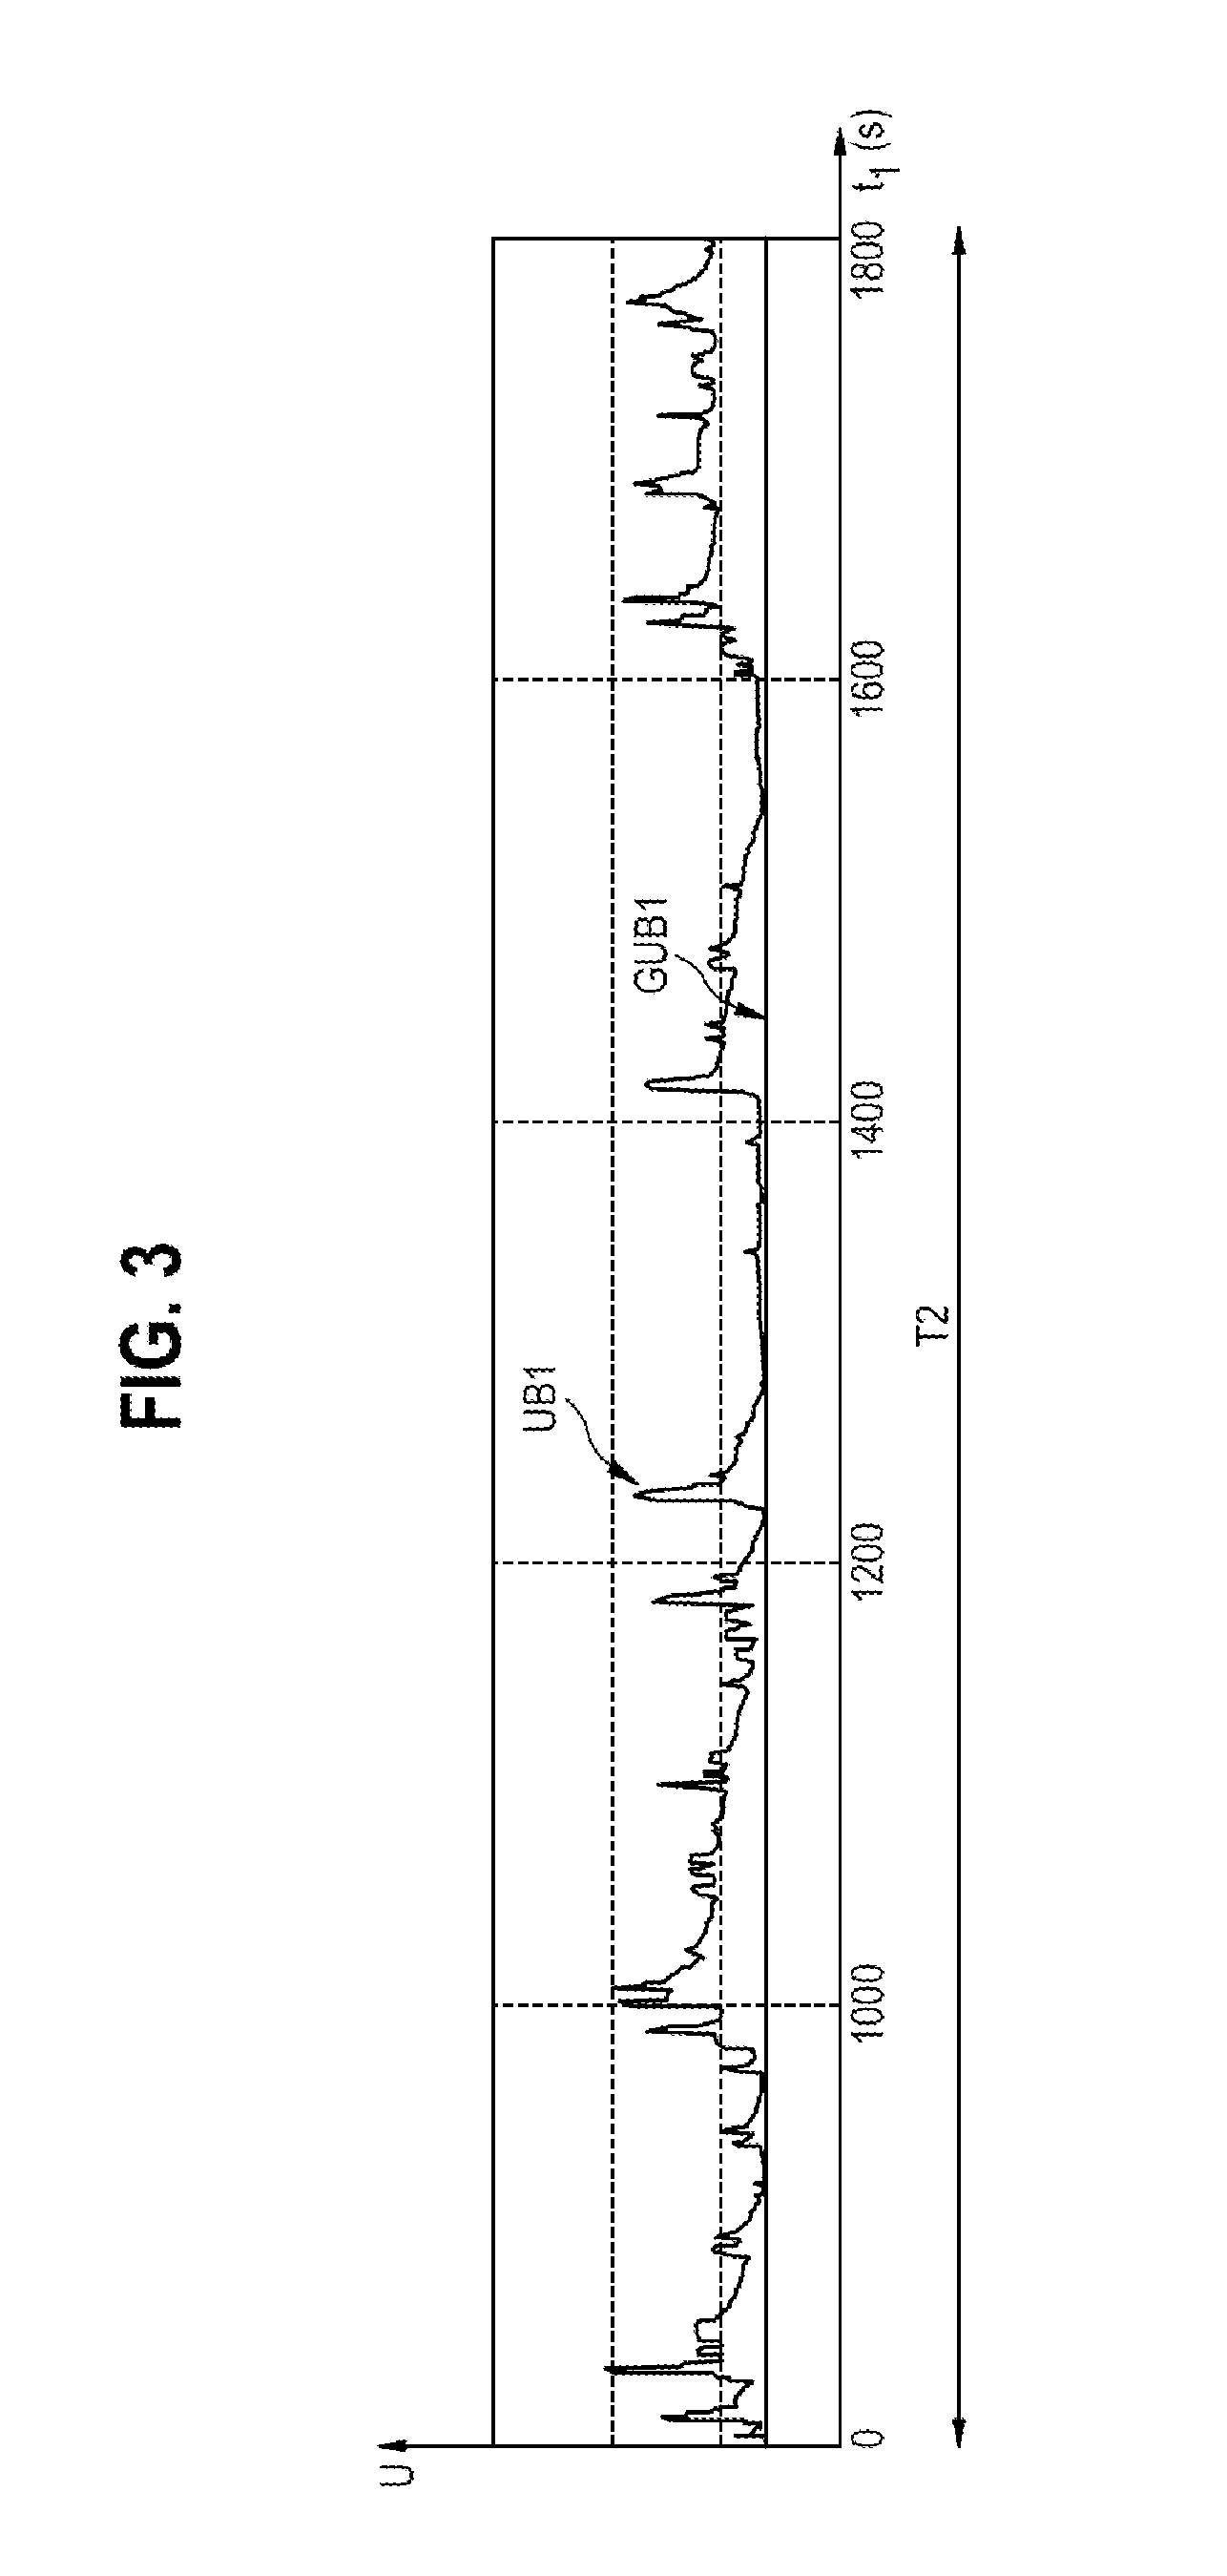 Method and apparatus for determining a constant current limit value